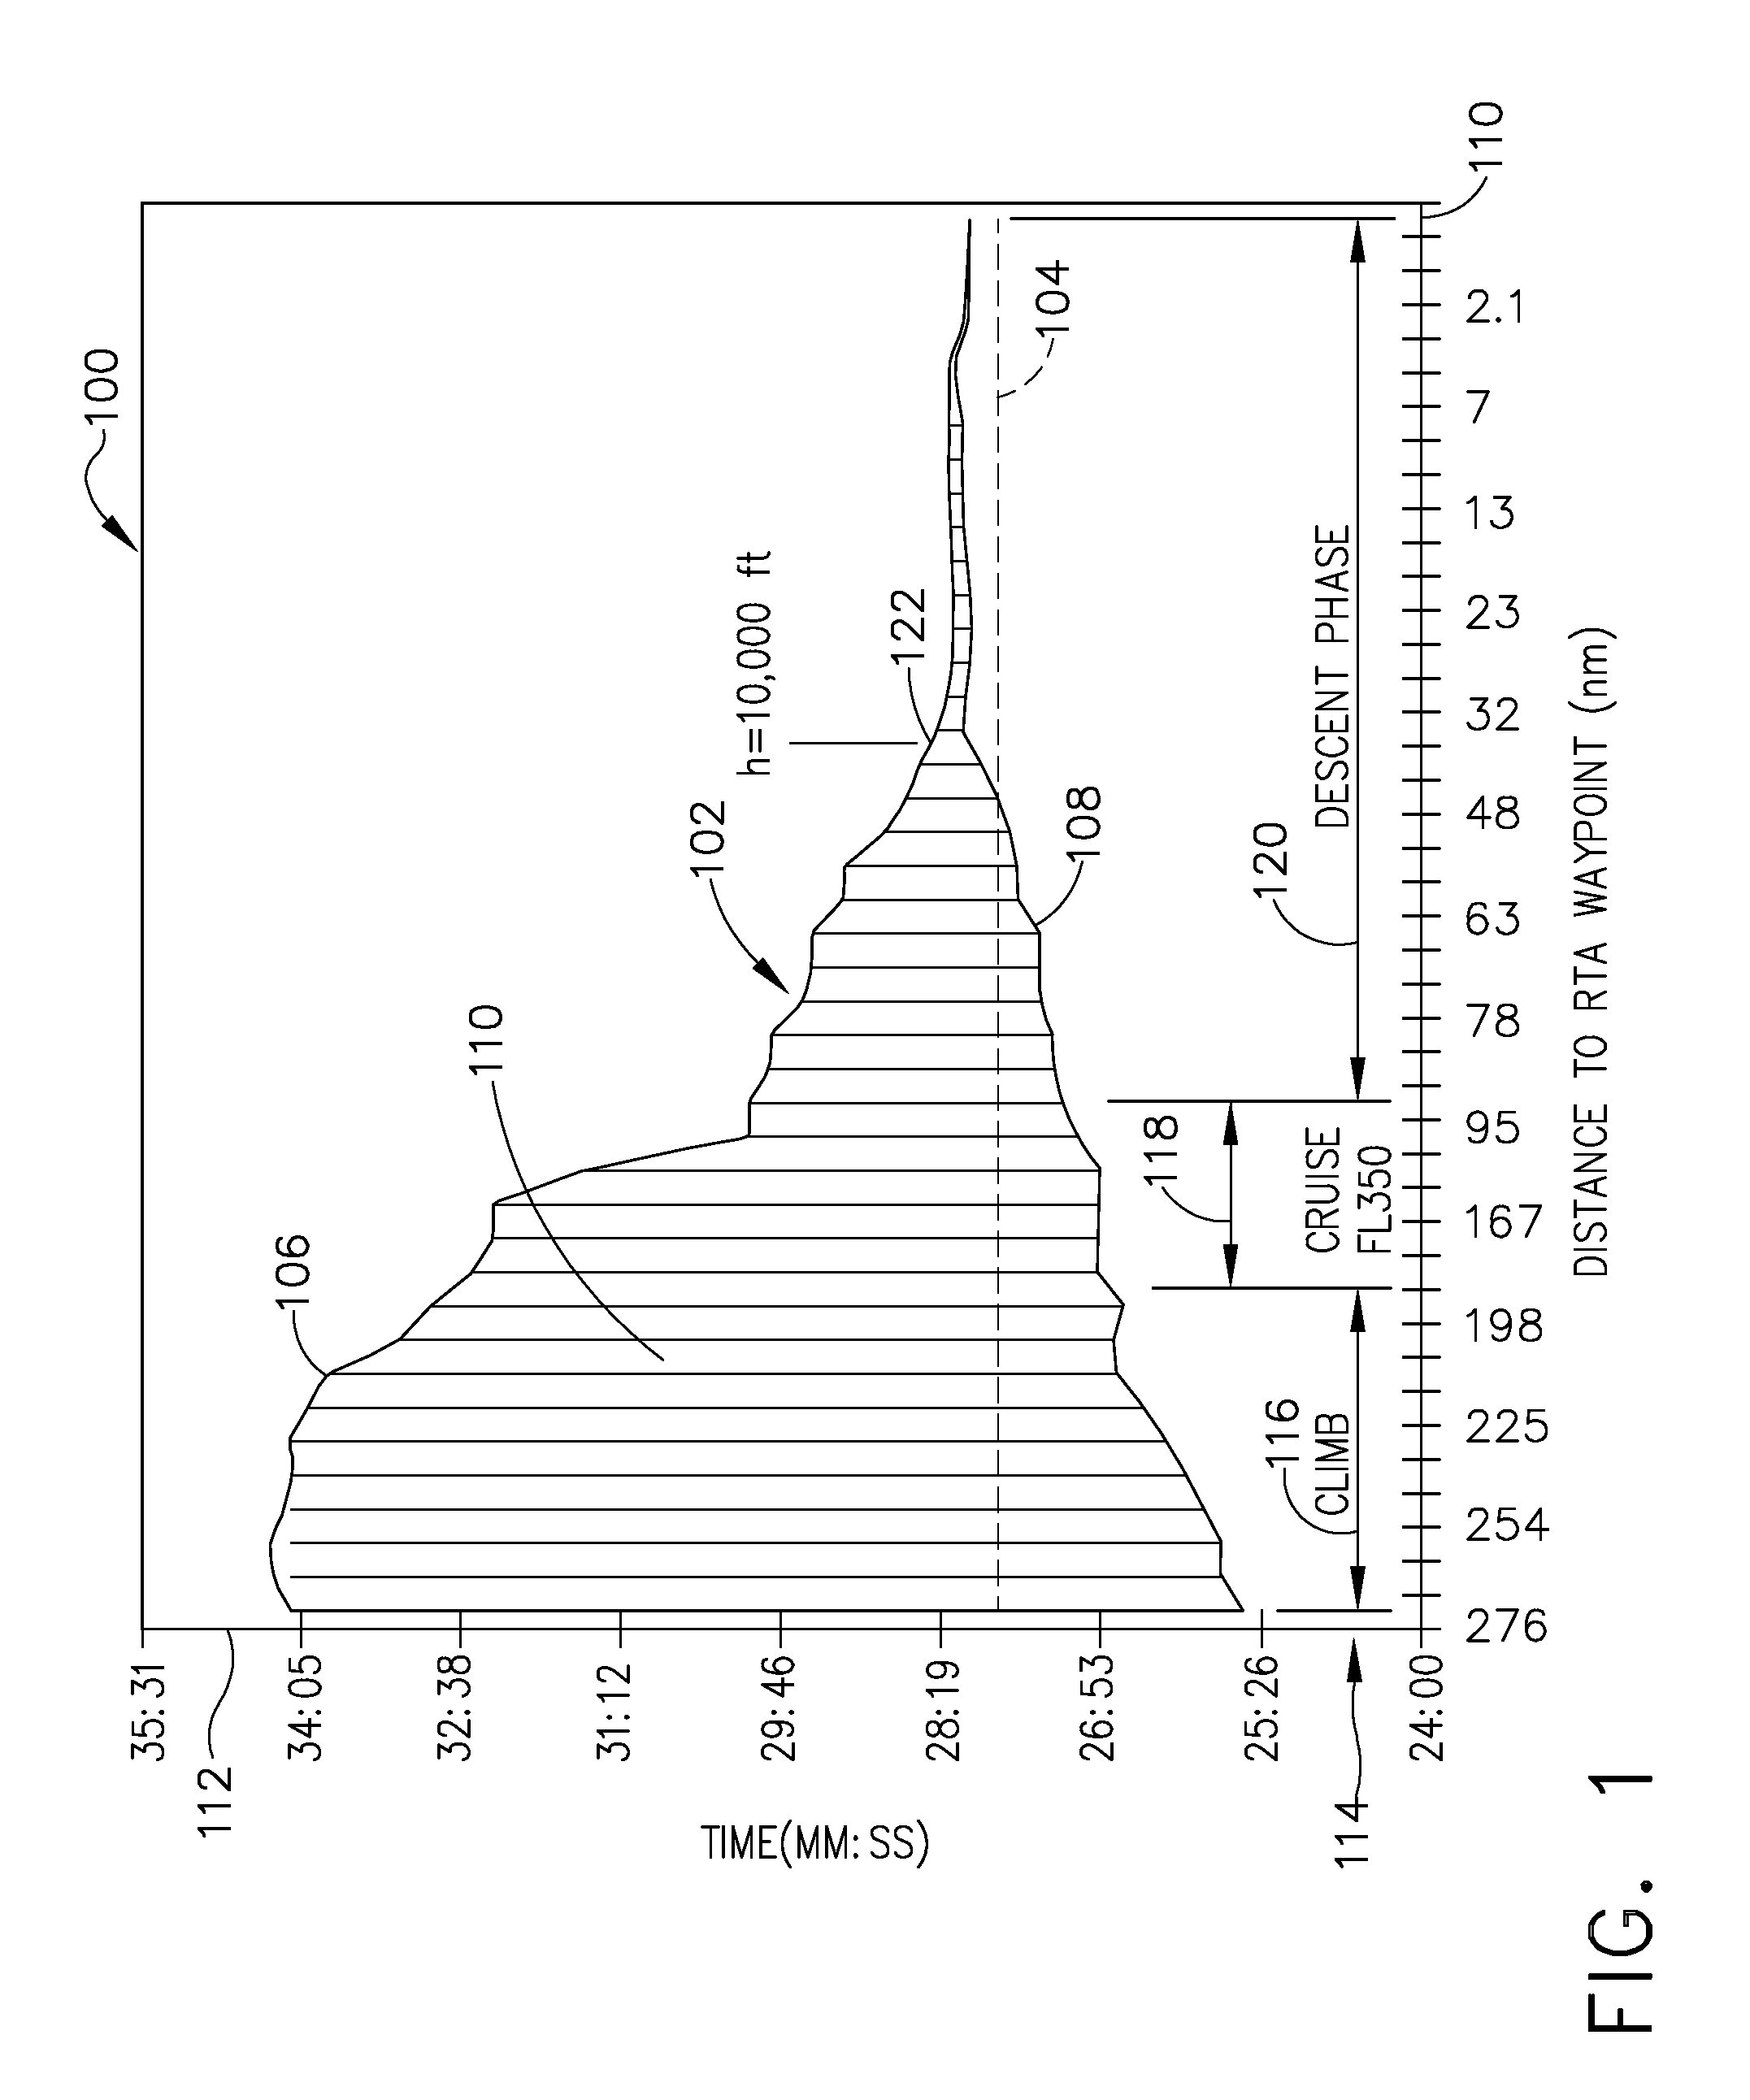 Methods and system for time of arrival control using available speed authority